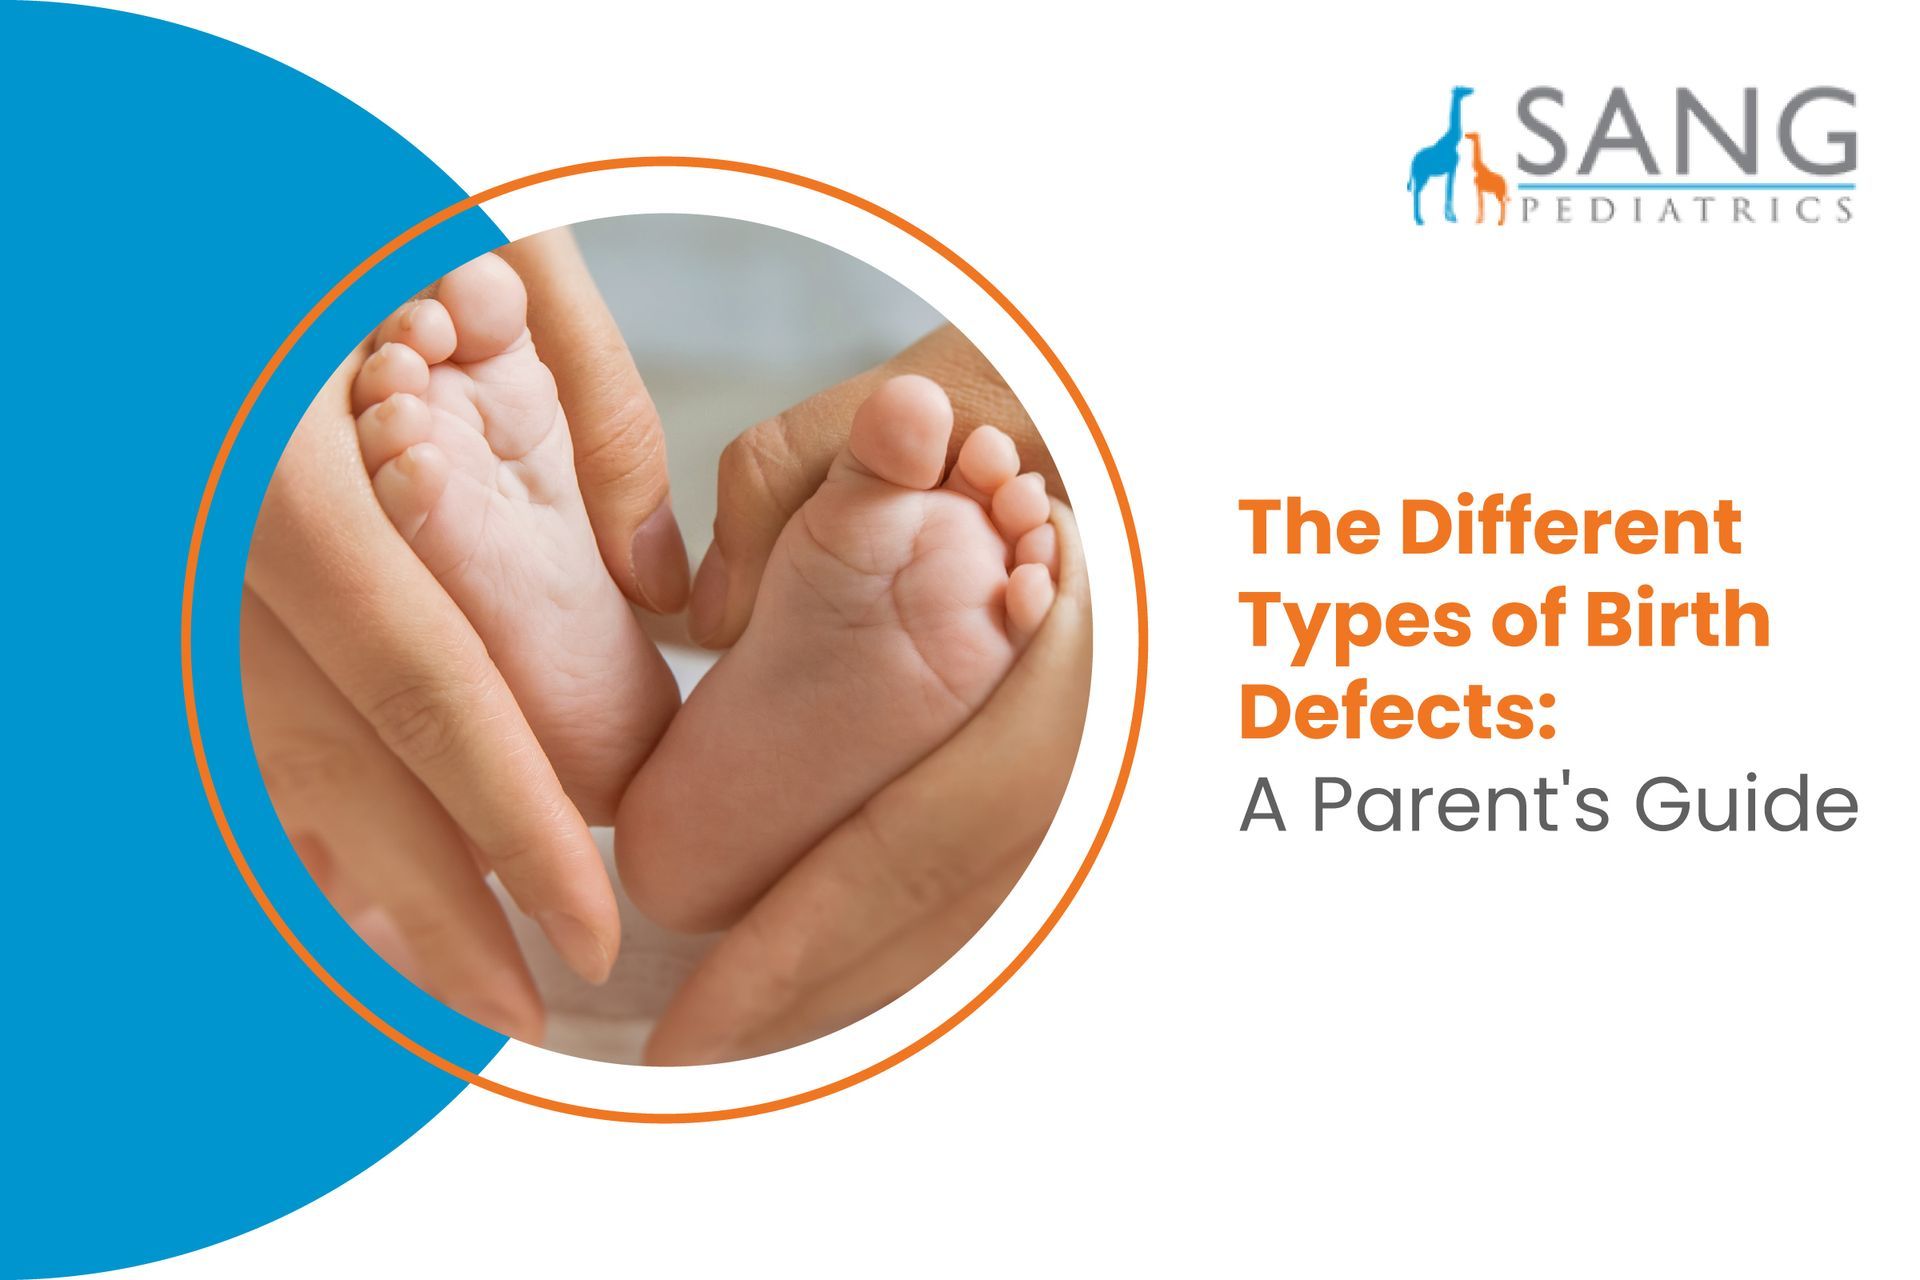 The Different Types of Birth Defects: A Parent’s Guide